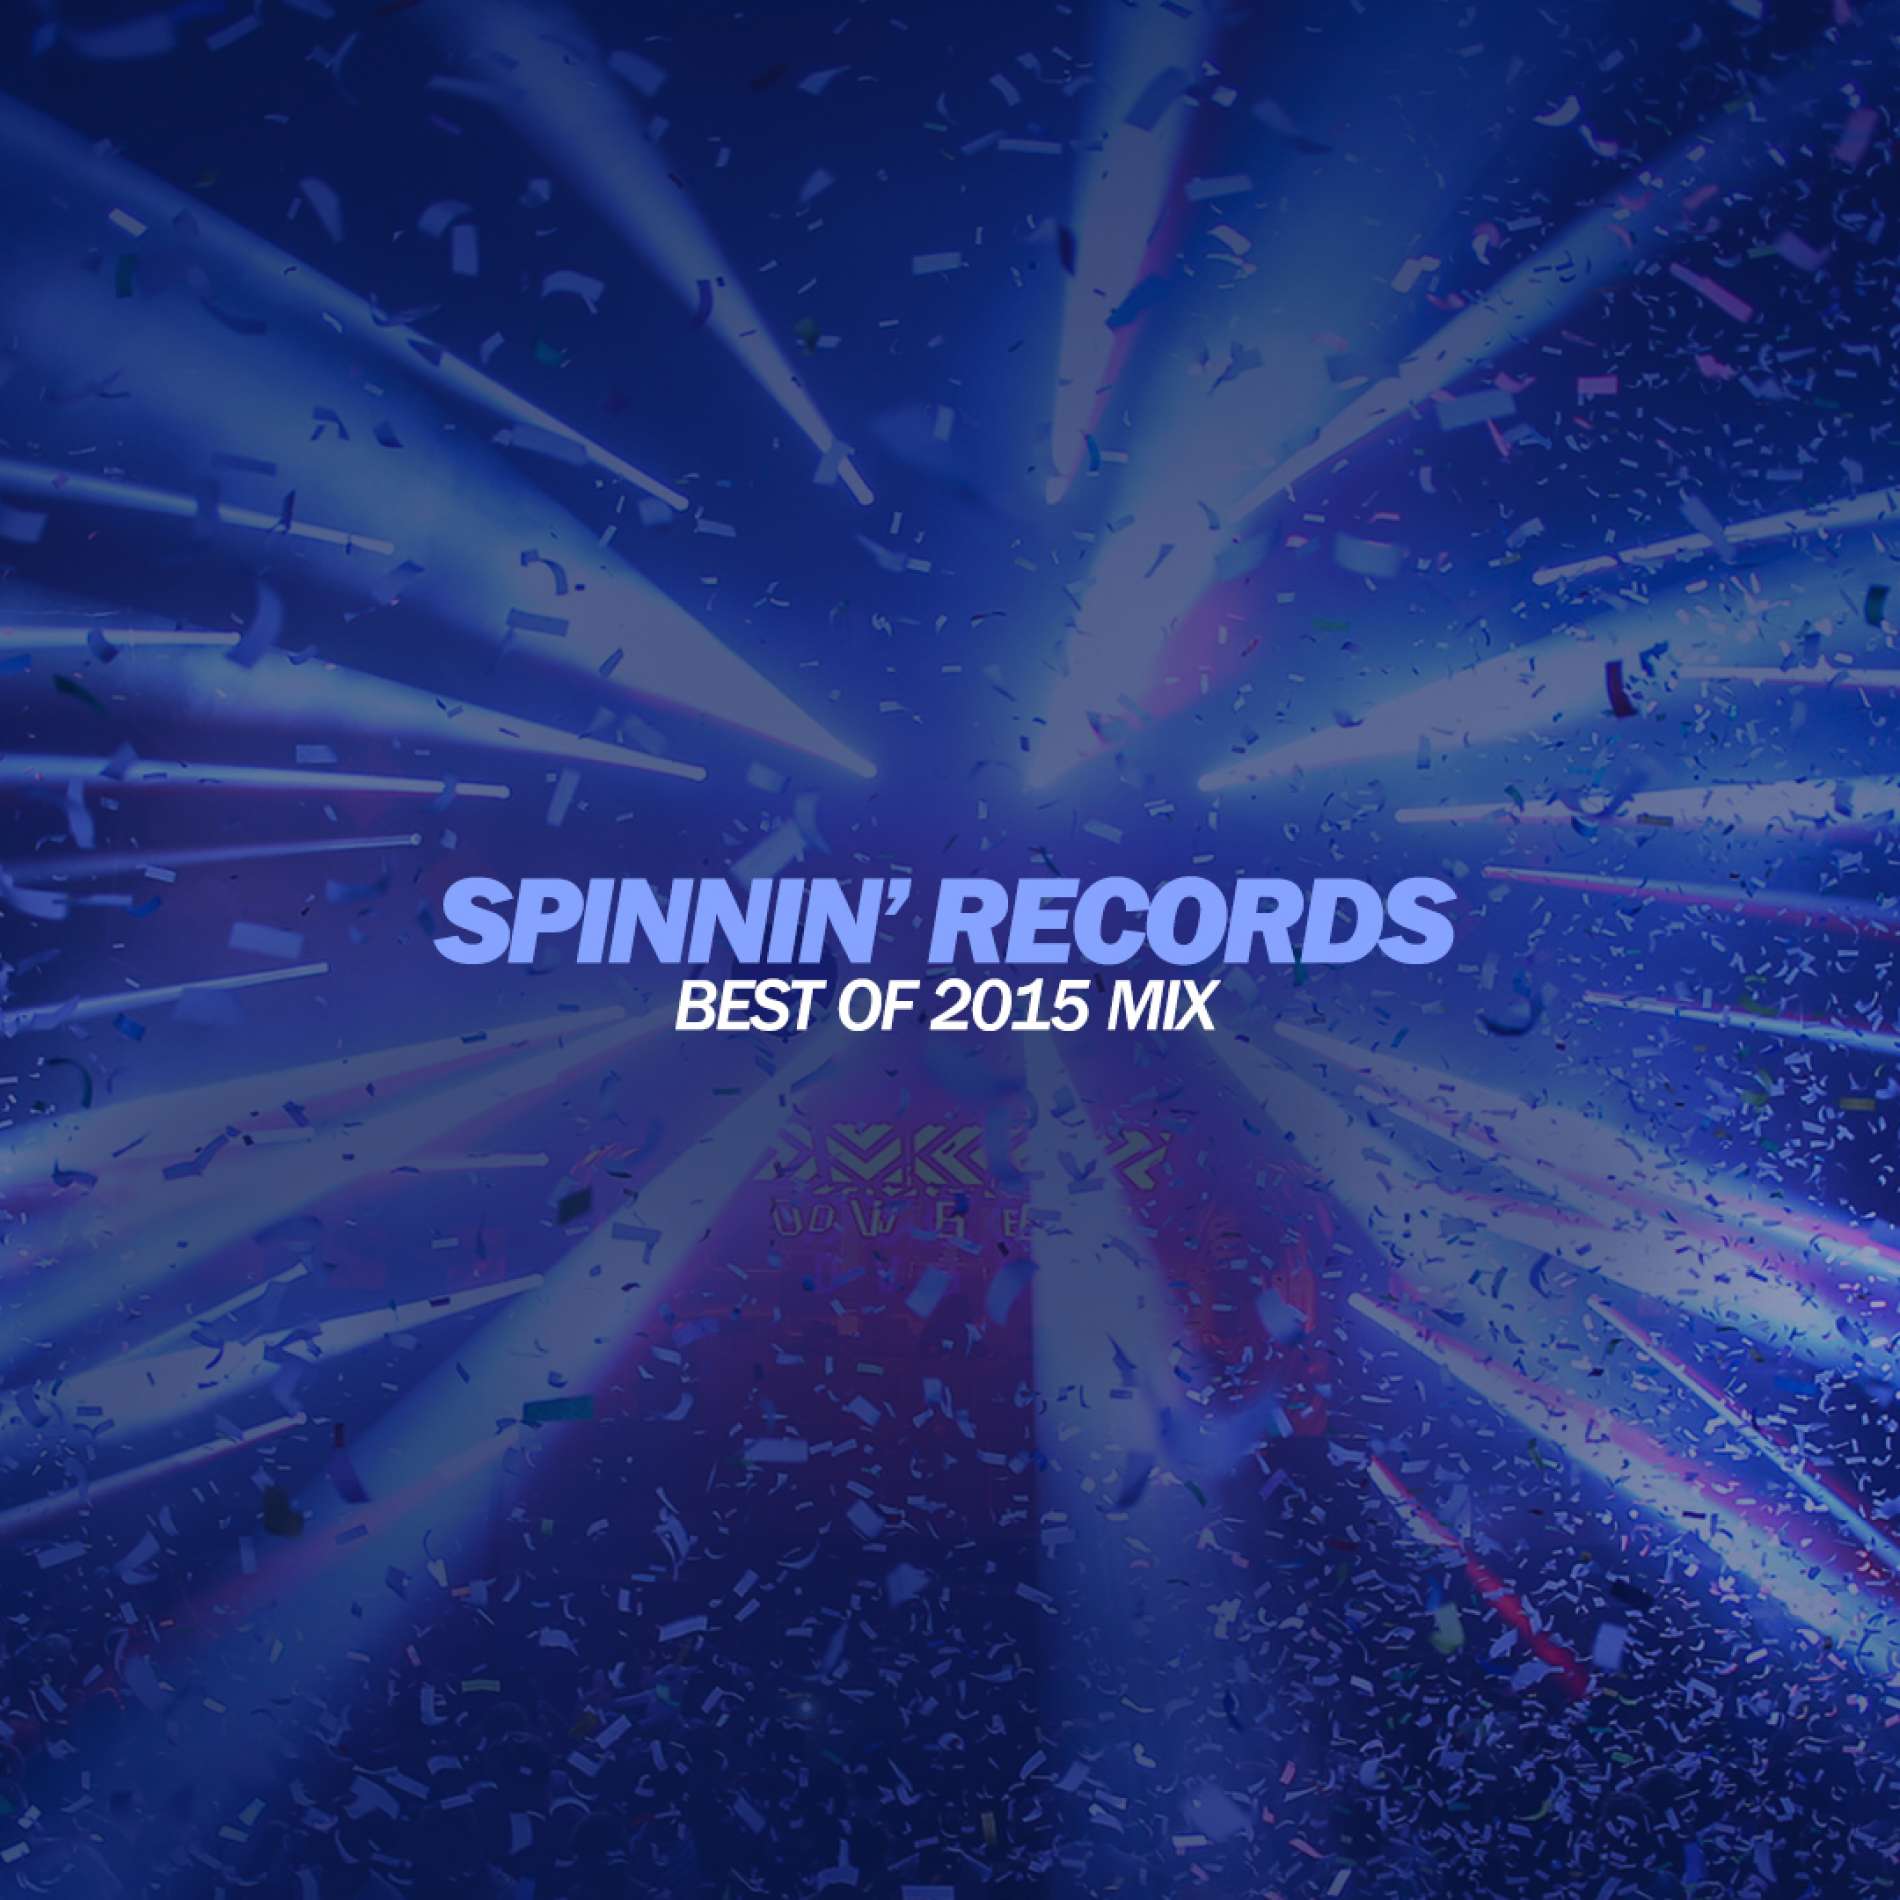 Spinnin's Year Mix brings you the best of 2015